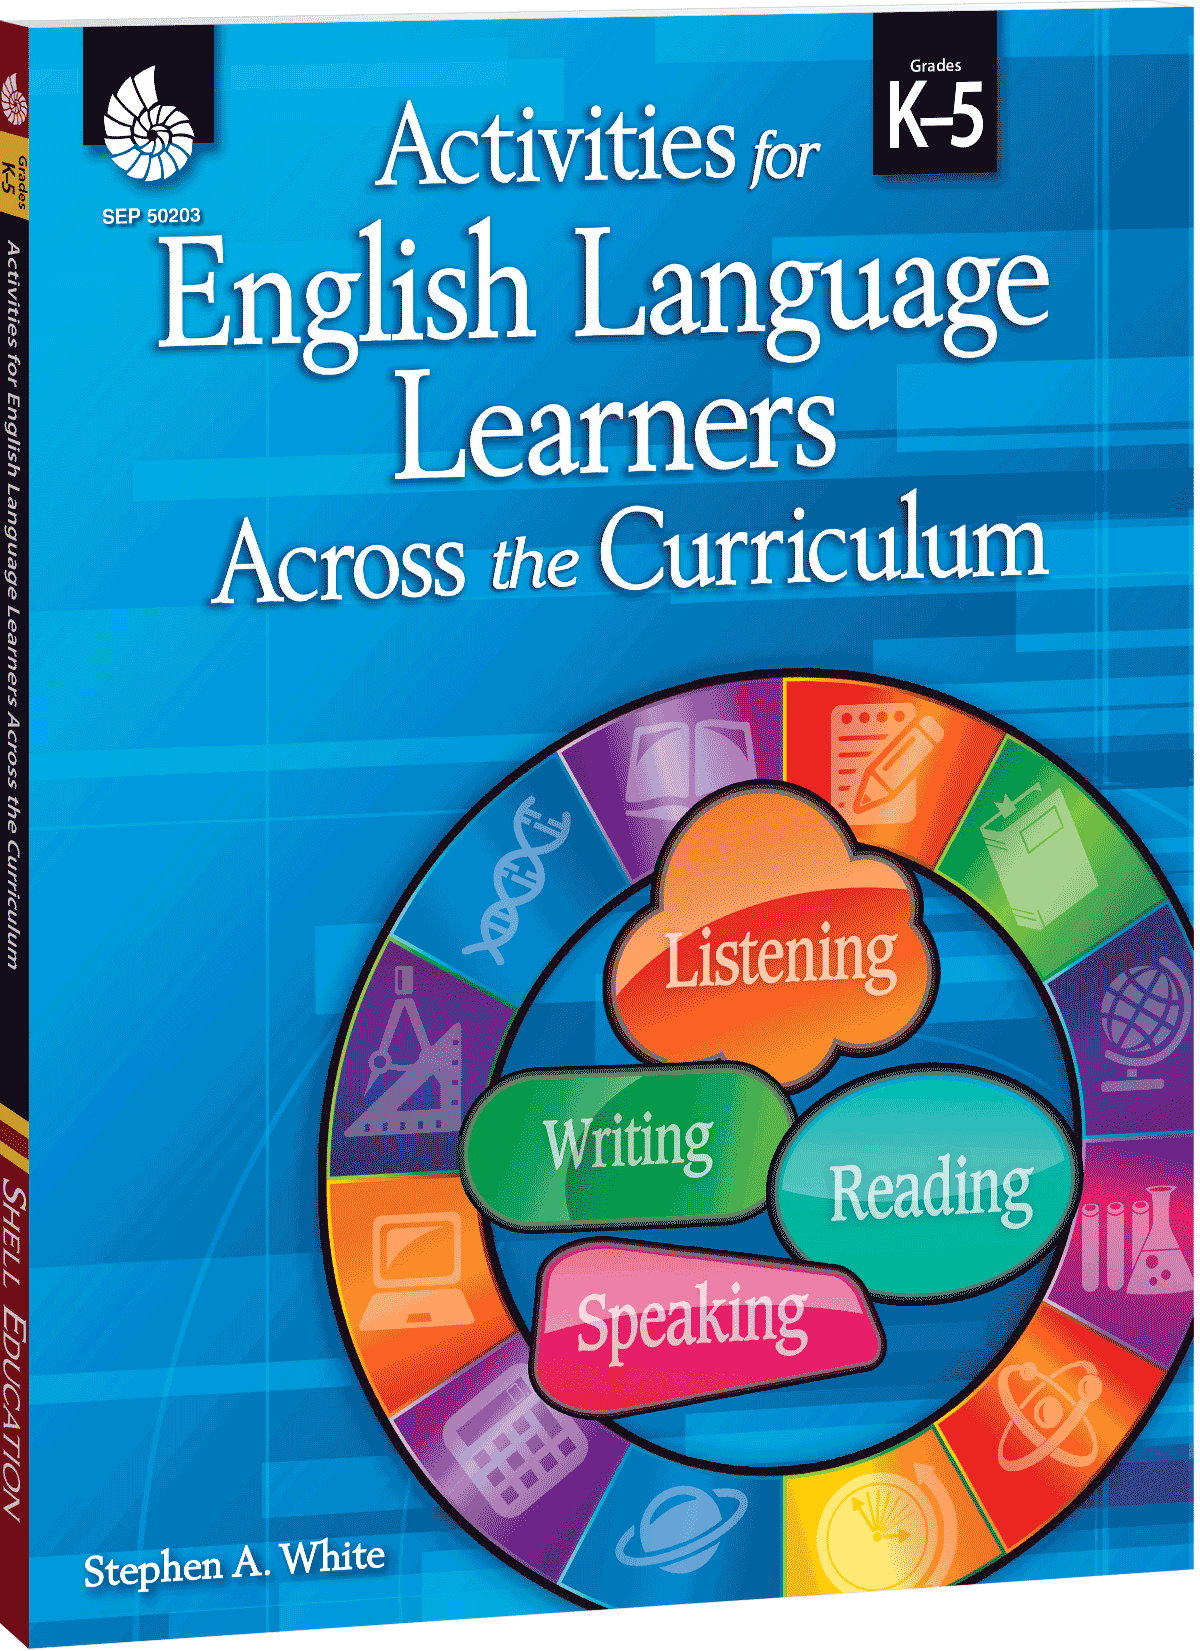 activities-for-english-language-learners-across-the-curriculum-teachers-classroom-resources